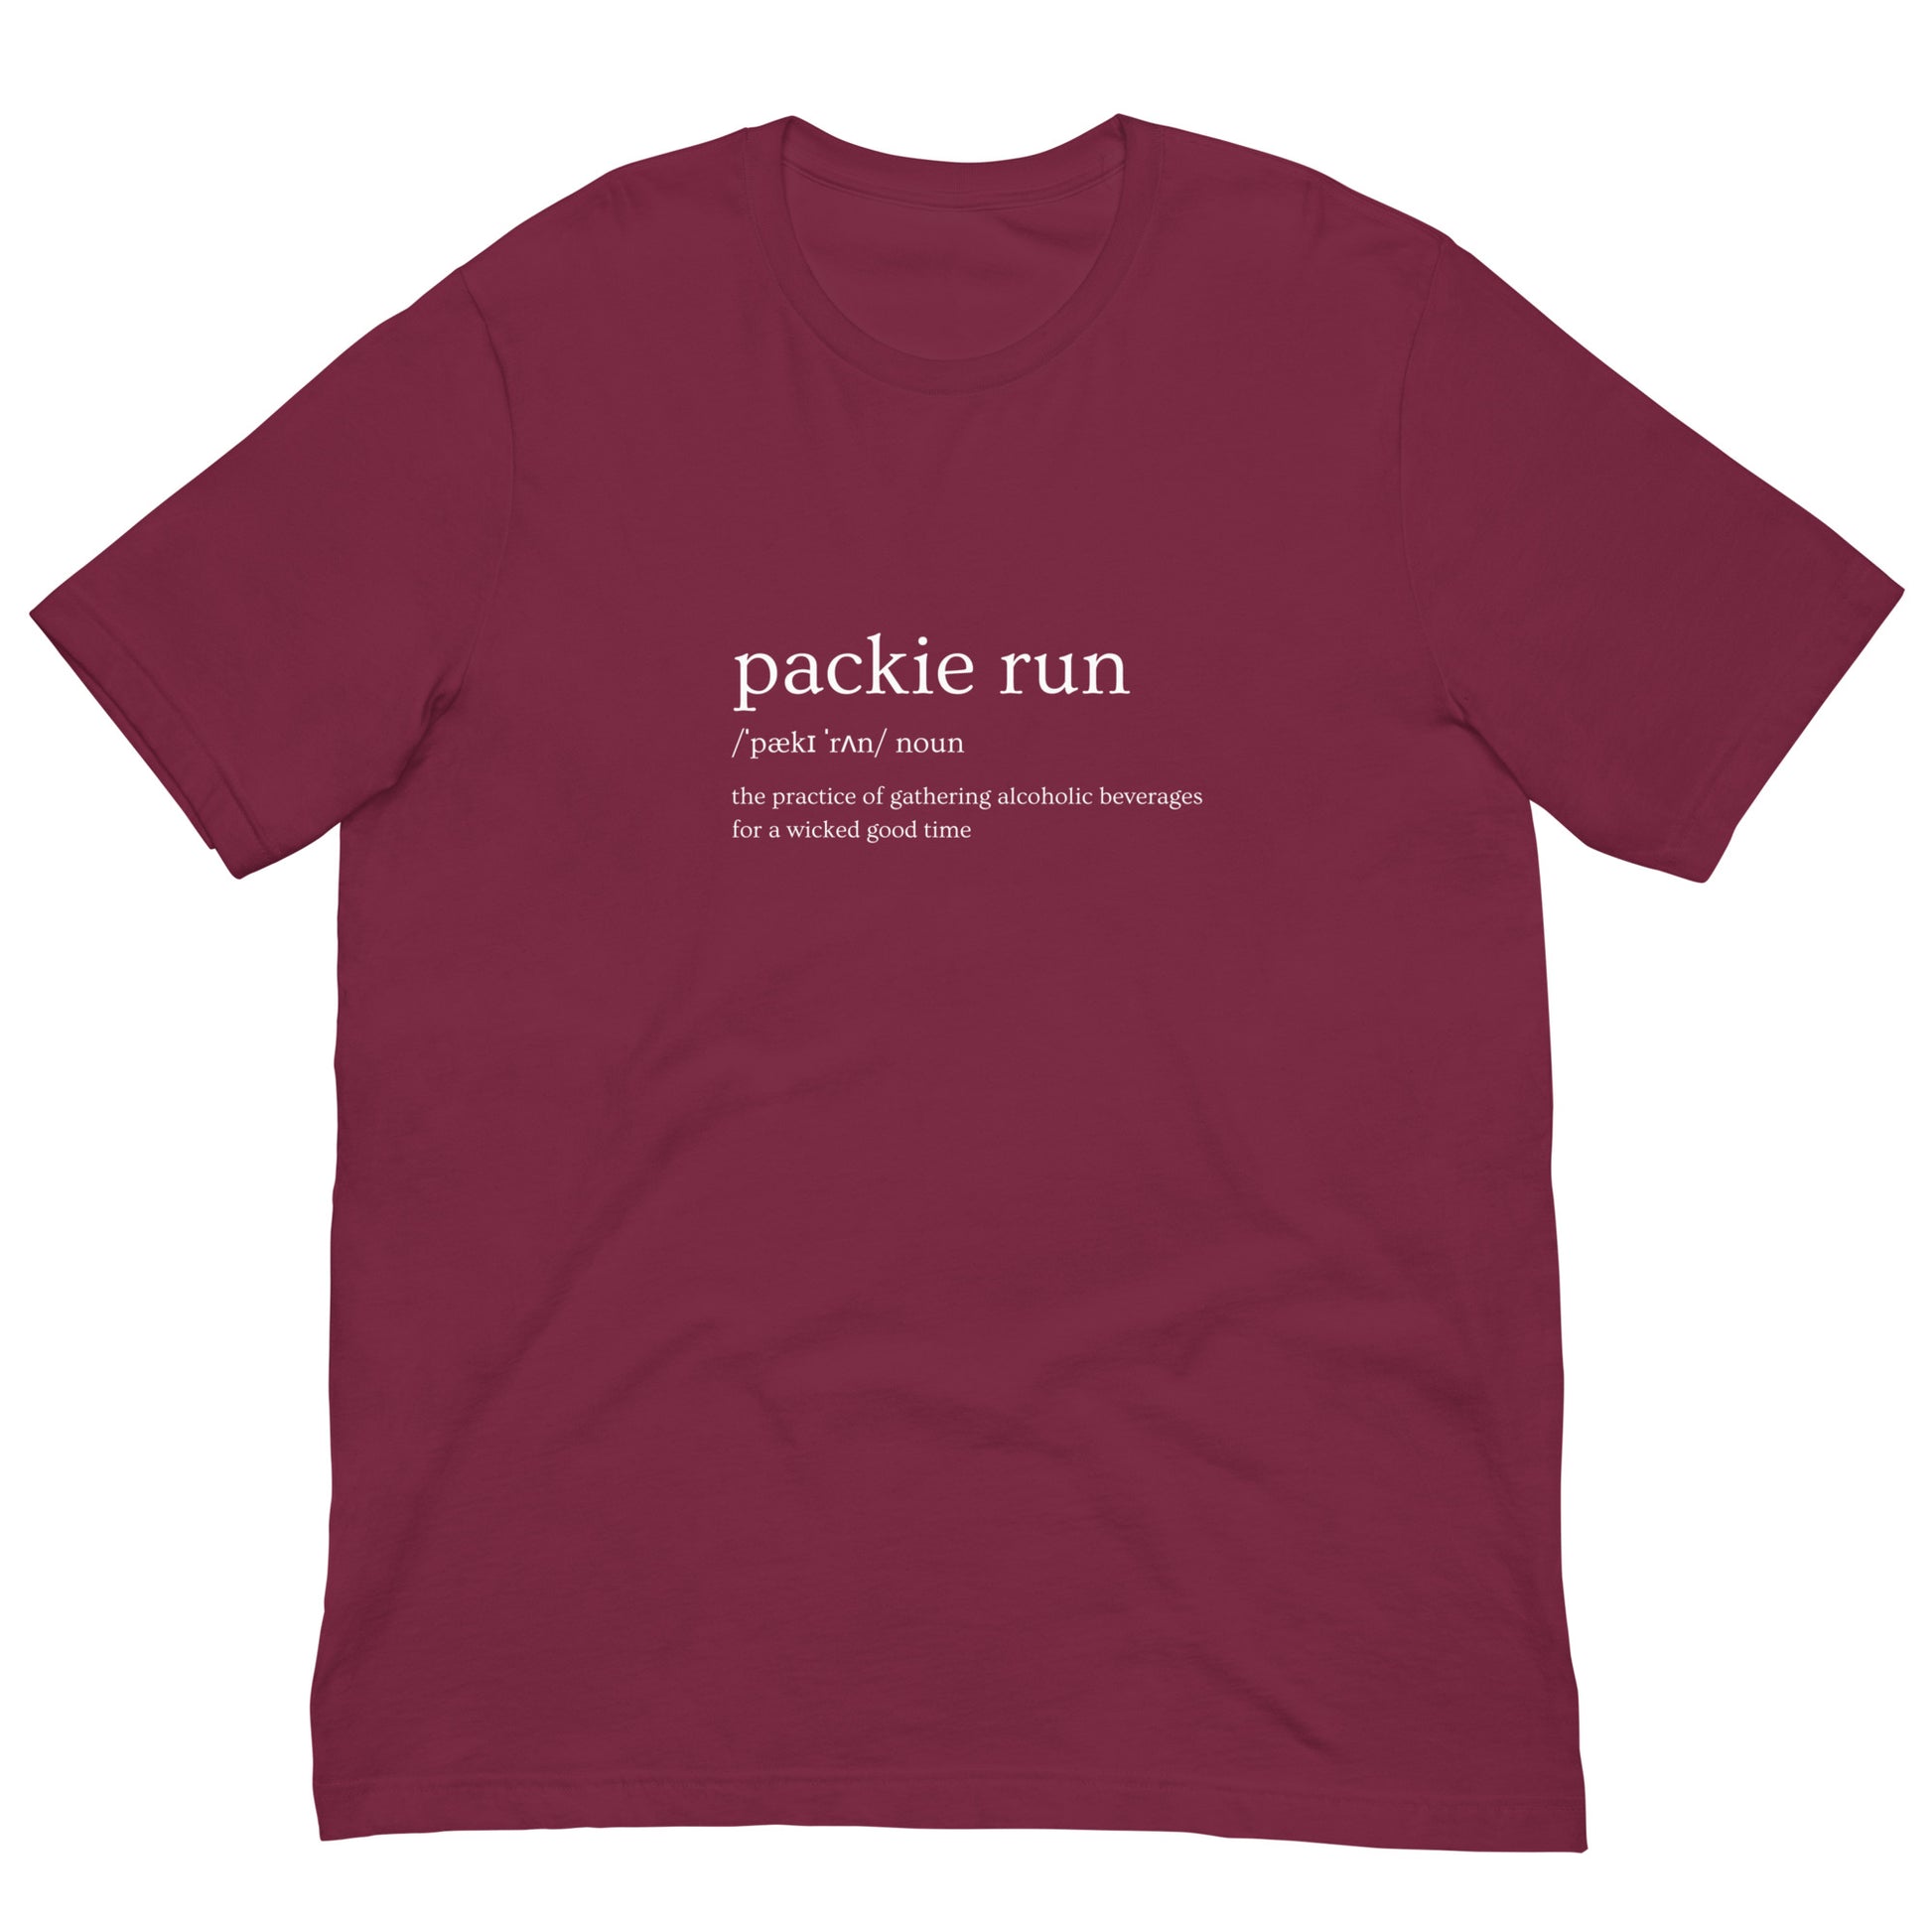 maroon tshirt that says "packie run, noun, the practice of gathering alcoholic beverages for a wicked good time"